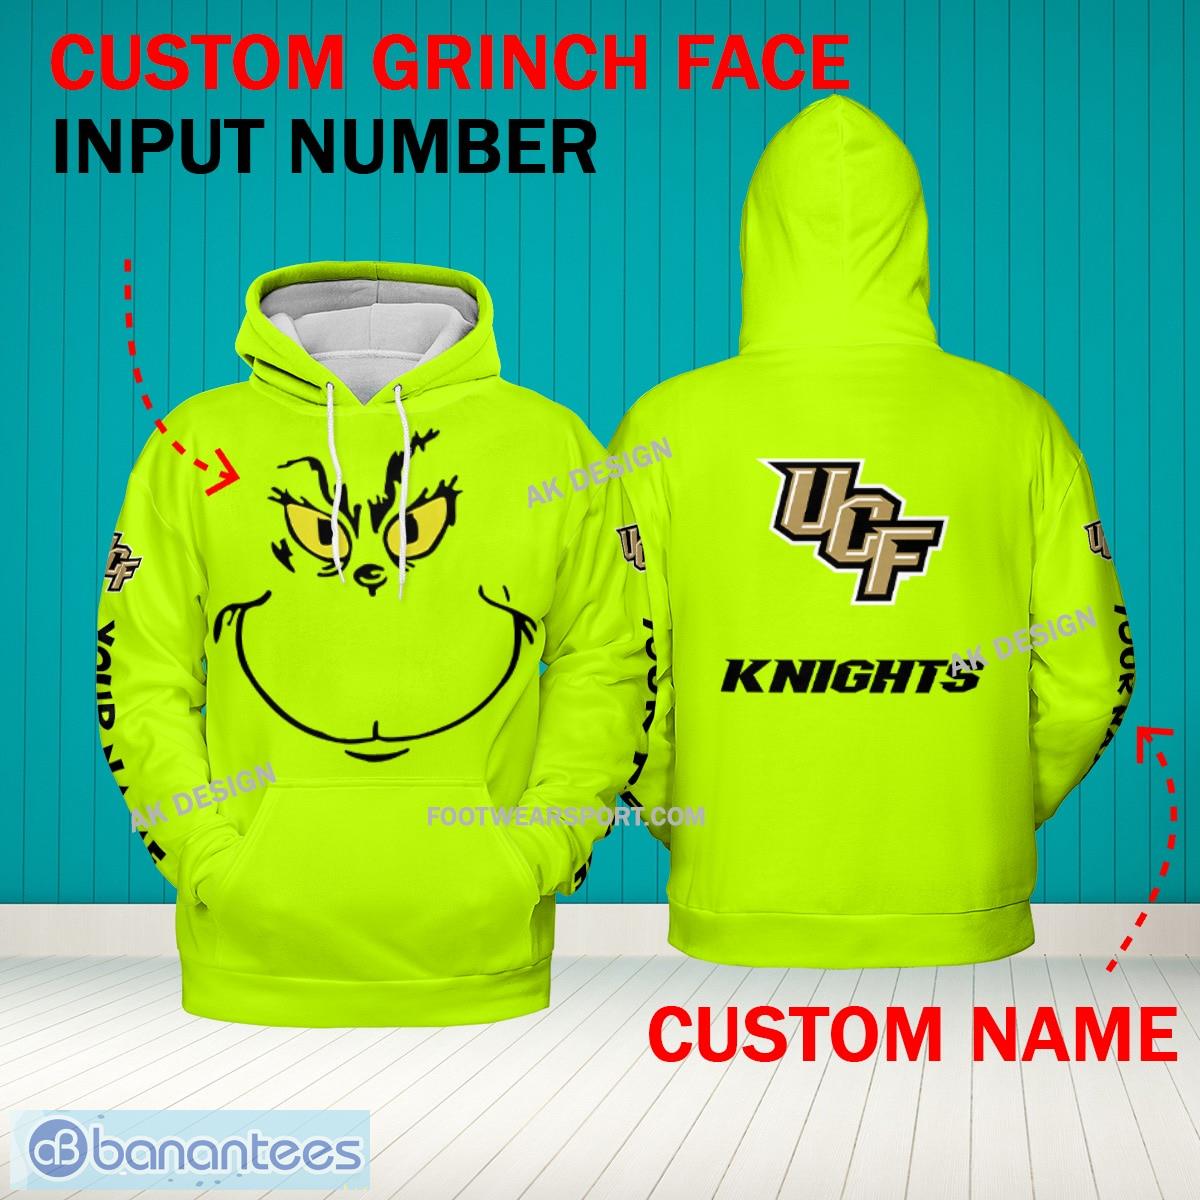 Grinch Face UCF Knights 3D Hoodie, Zip Hoodie, Sweater Green AOP Custom Number And Name - Grinch Face NCAA UCF Knights 3D Hoodie